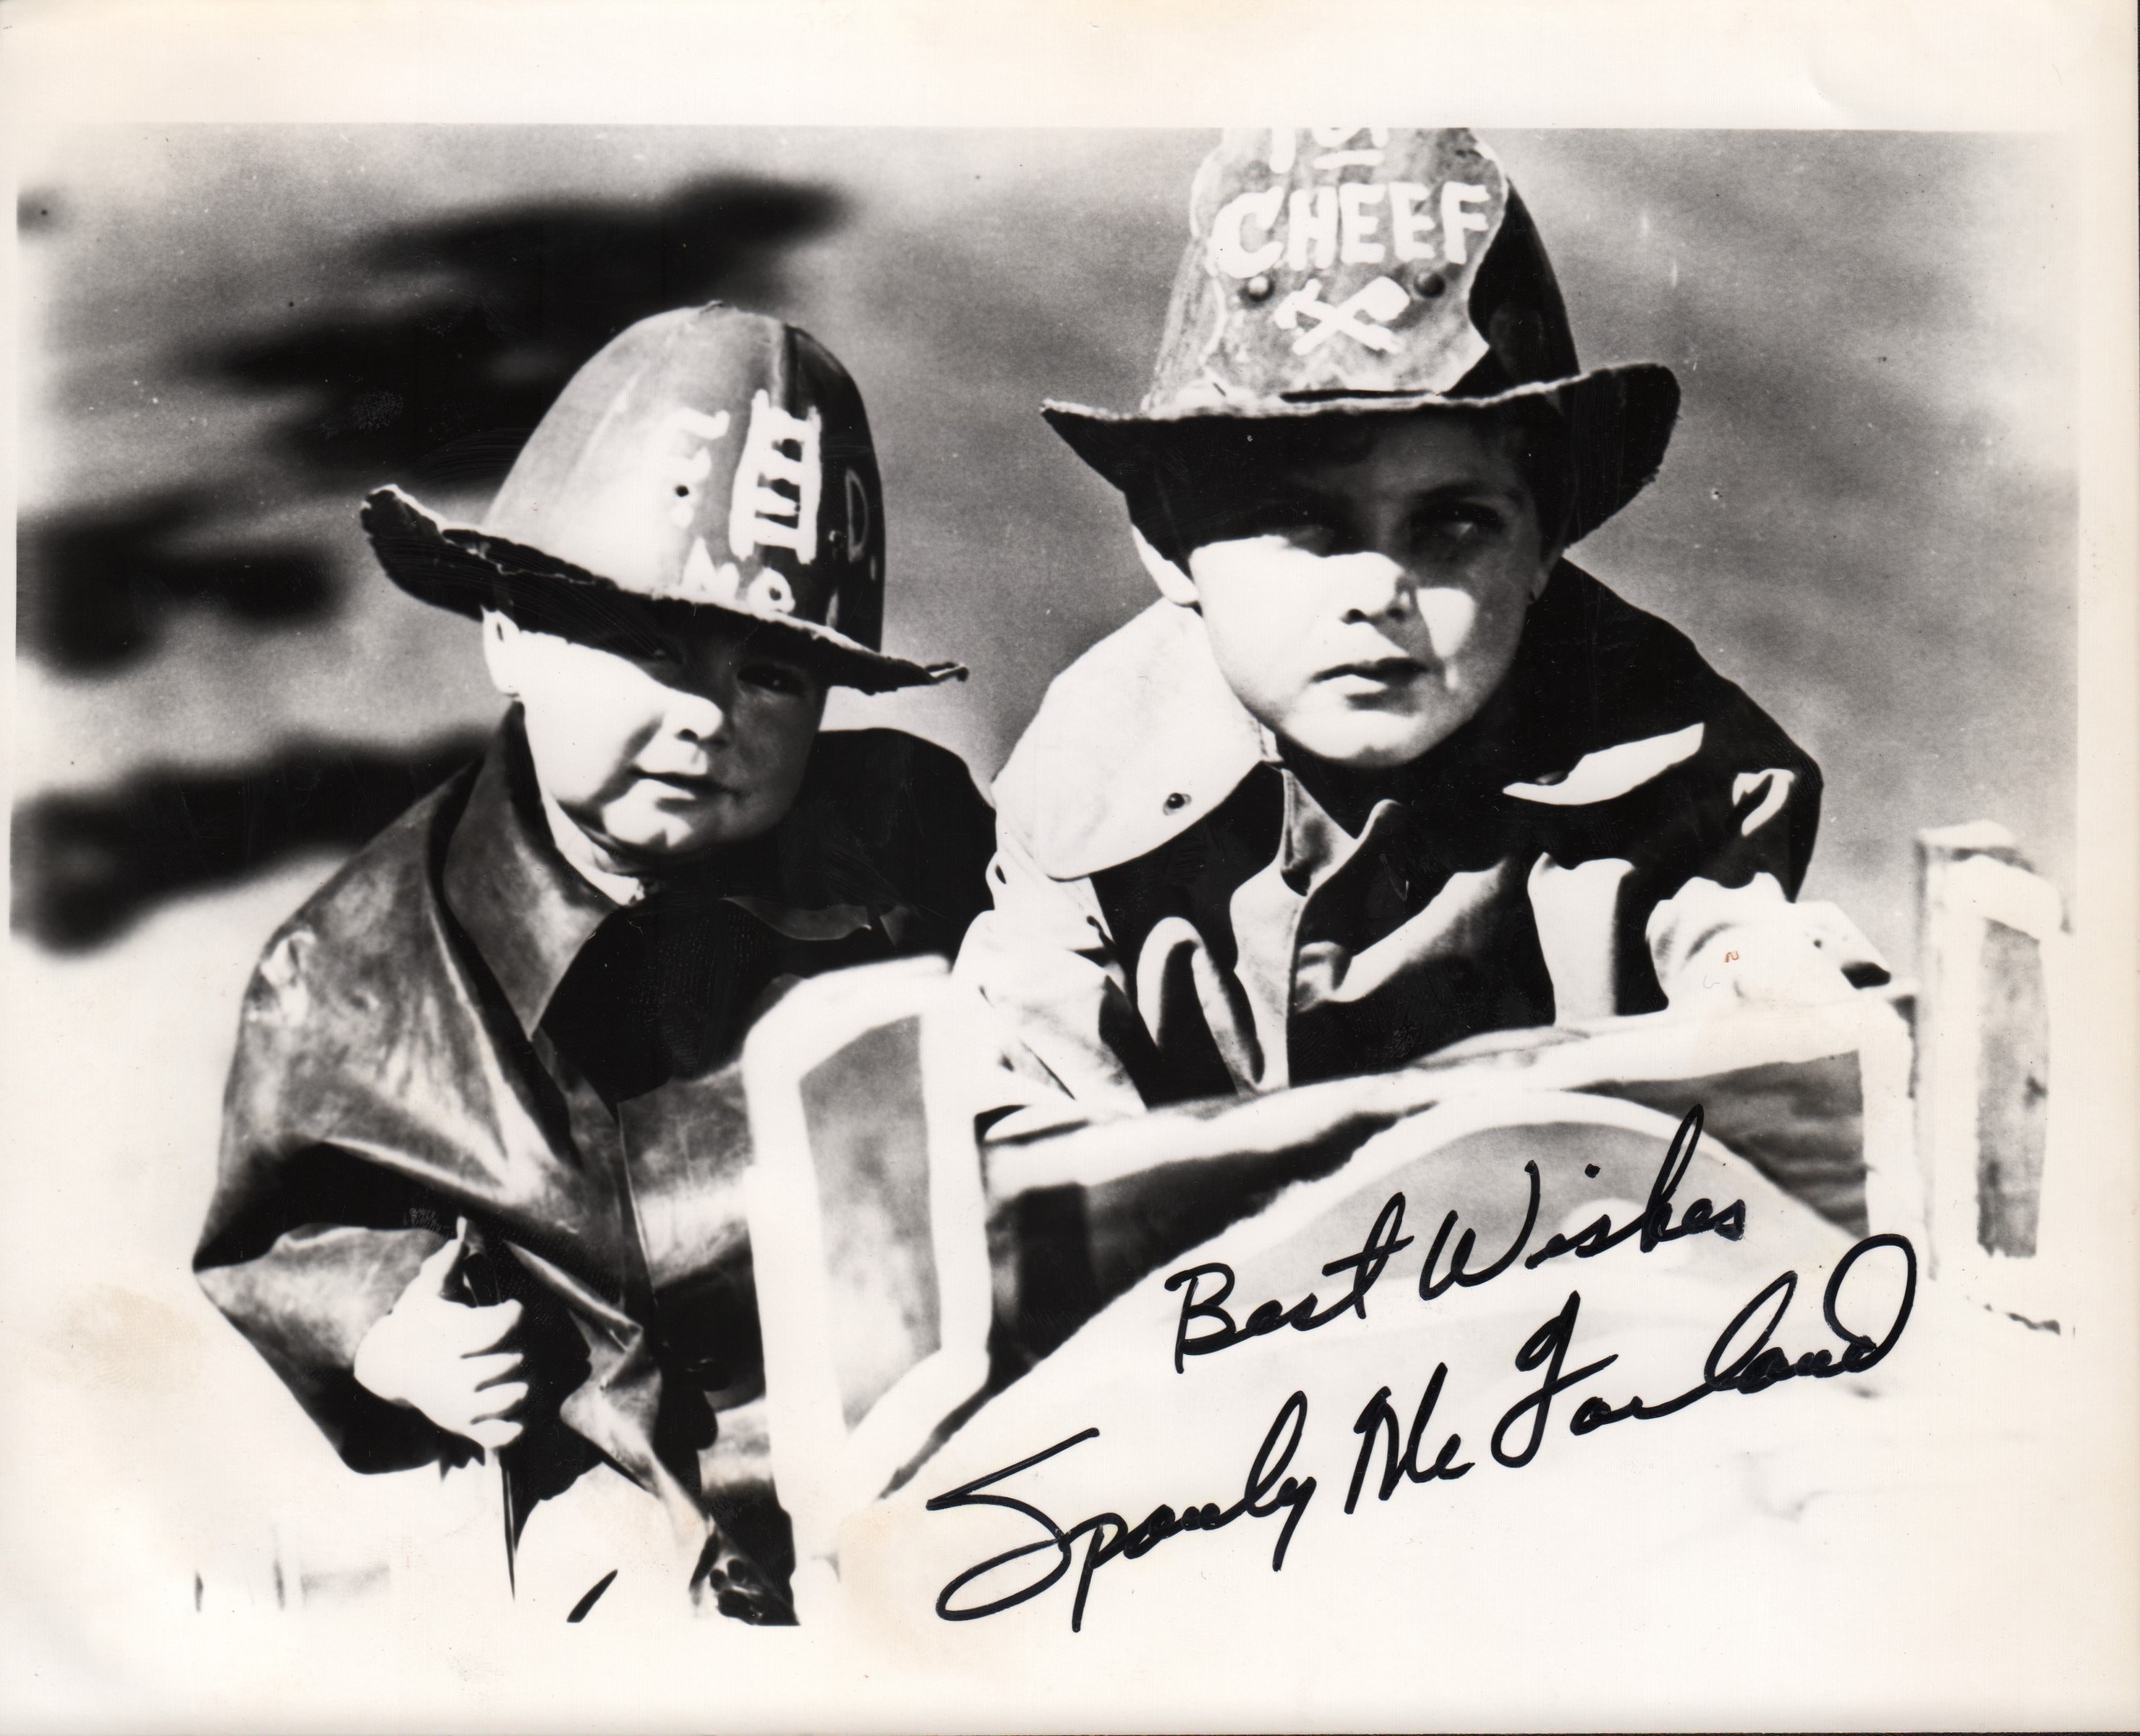 - Our Gang's Spanky McFarland Signed Photo (PSA/DNA)